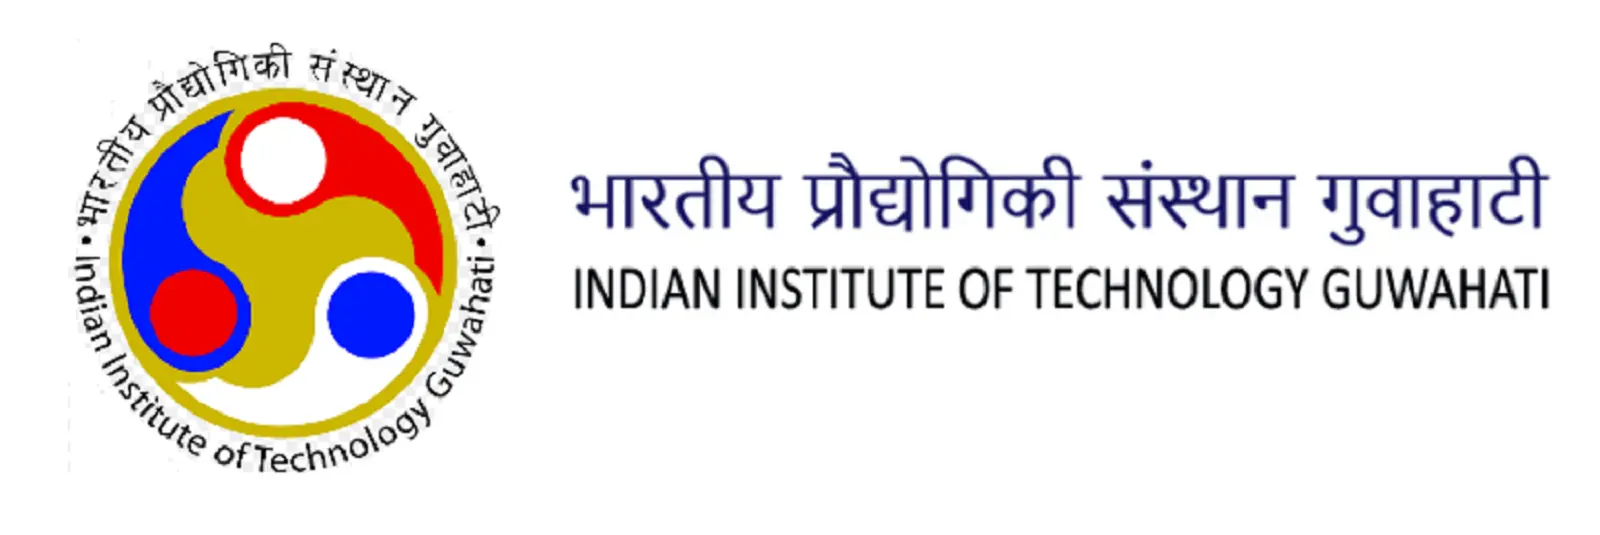 IIT Guwahati Launches Fully Online BSc in Data Science & AI